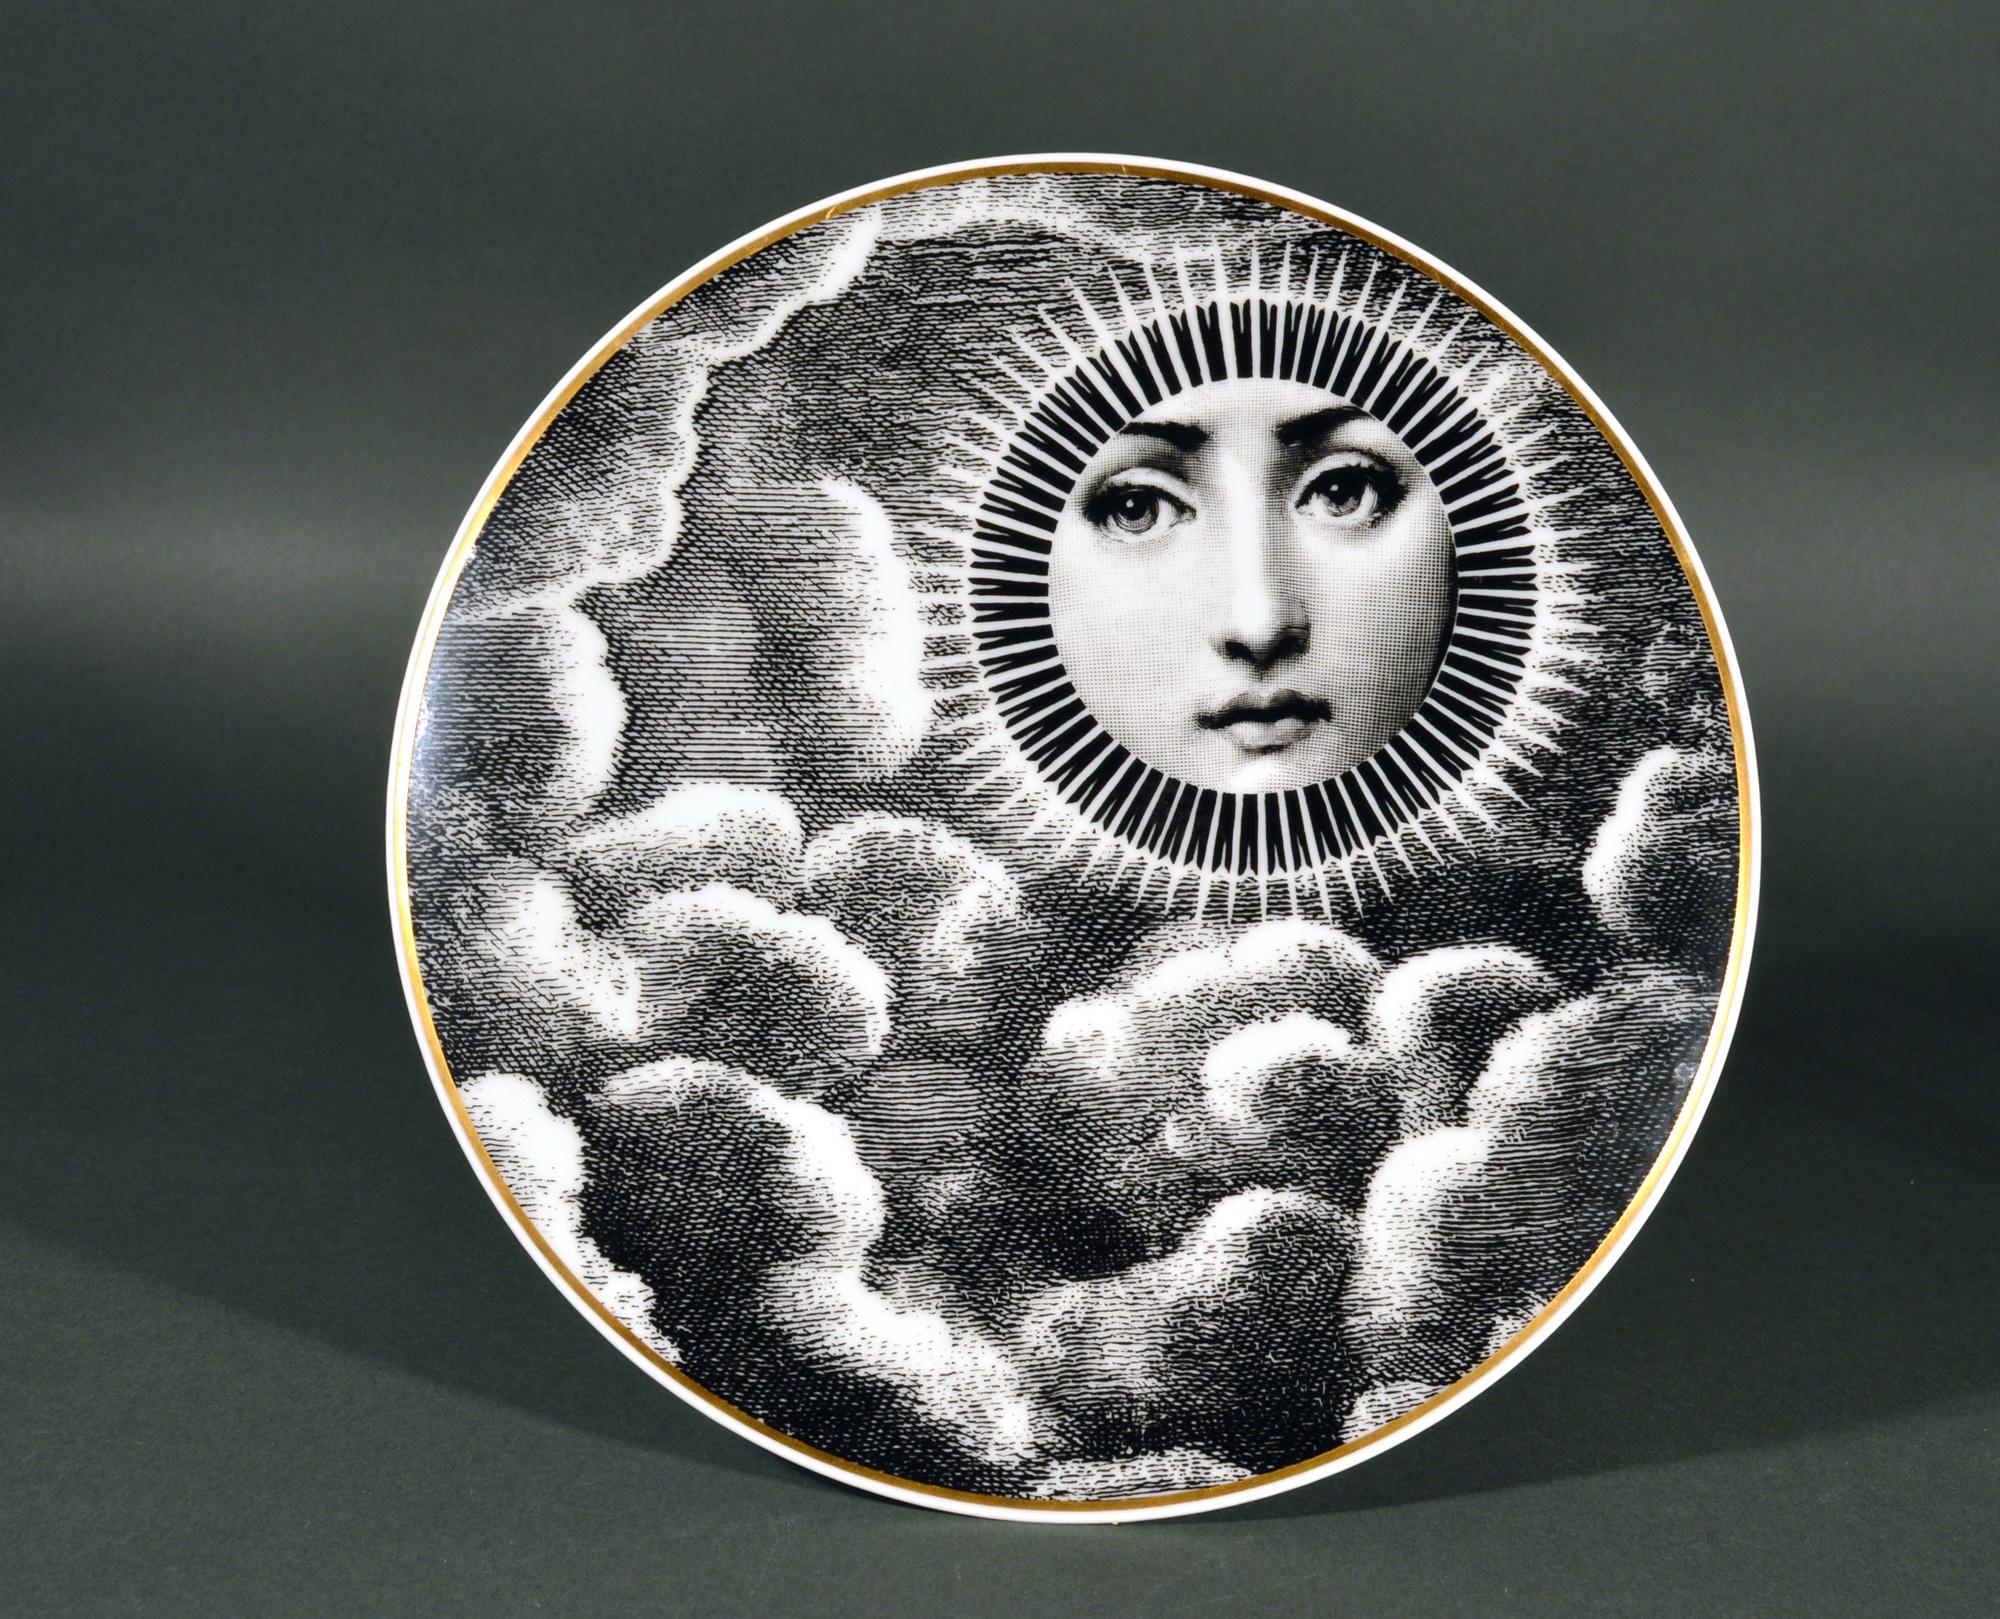 Rosenthal Piero Fornasetti porcelain plate, themes & variations, Motiv 18
The 1980s

The striking Rosenthal Fornasetti gold-rimmed black and white printed plate with the face of Lina Cavalieri depicted as the sun with rays surrounding her face